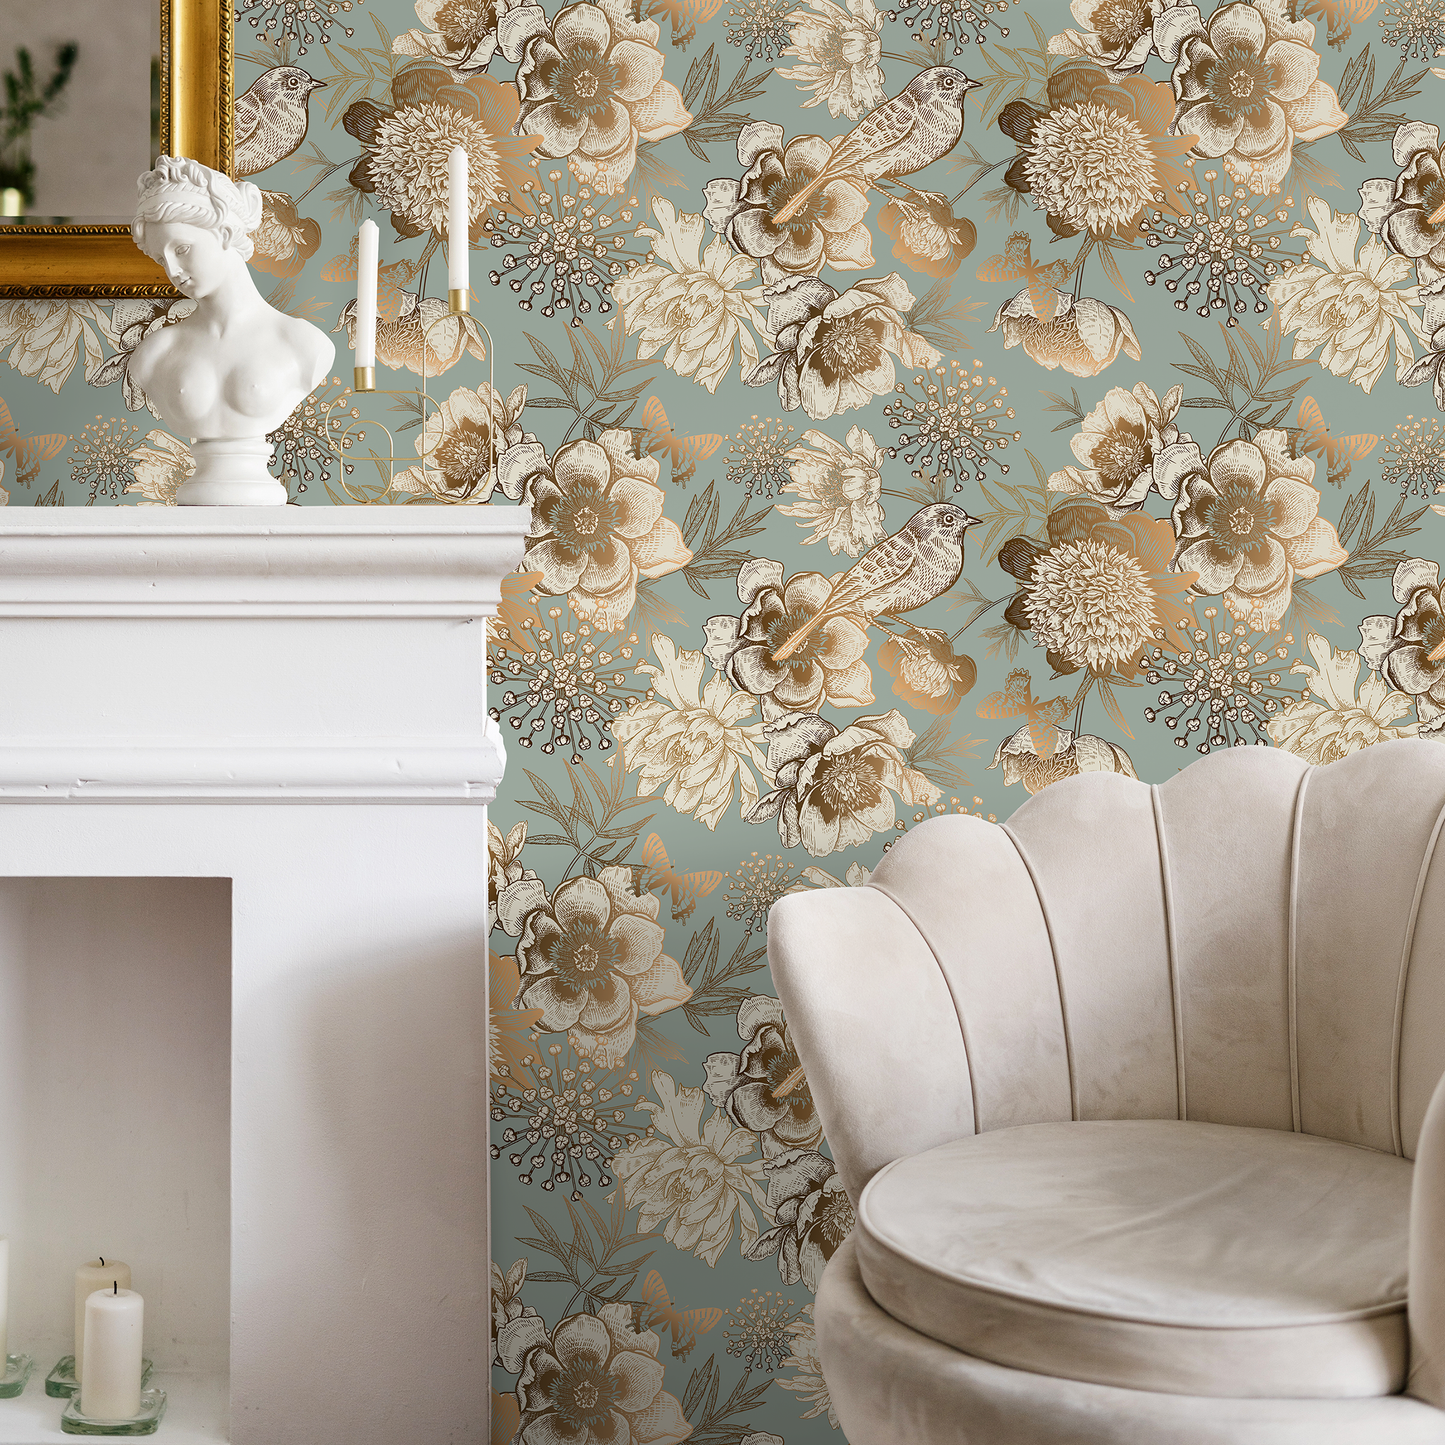 Removable Wallpaper Peel and Stick Wallpaper Wall Paper Wall Mural - Vintage Flower Mint and Non-Metalic Gold Color - A918